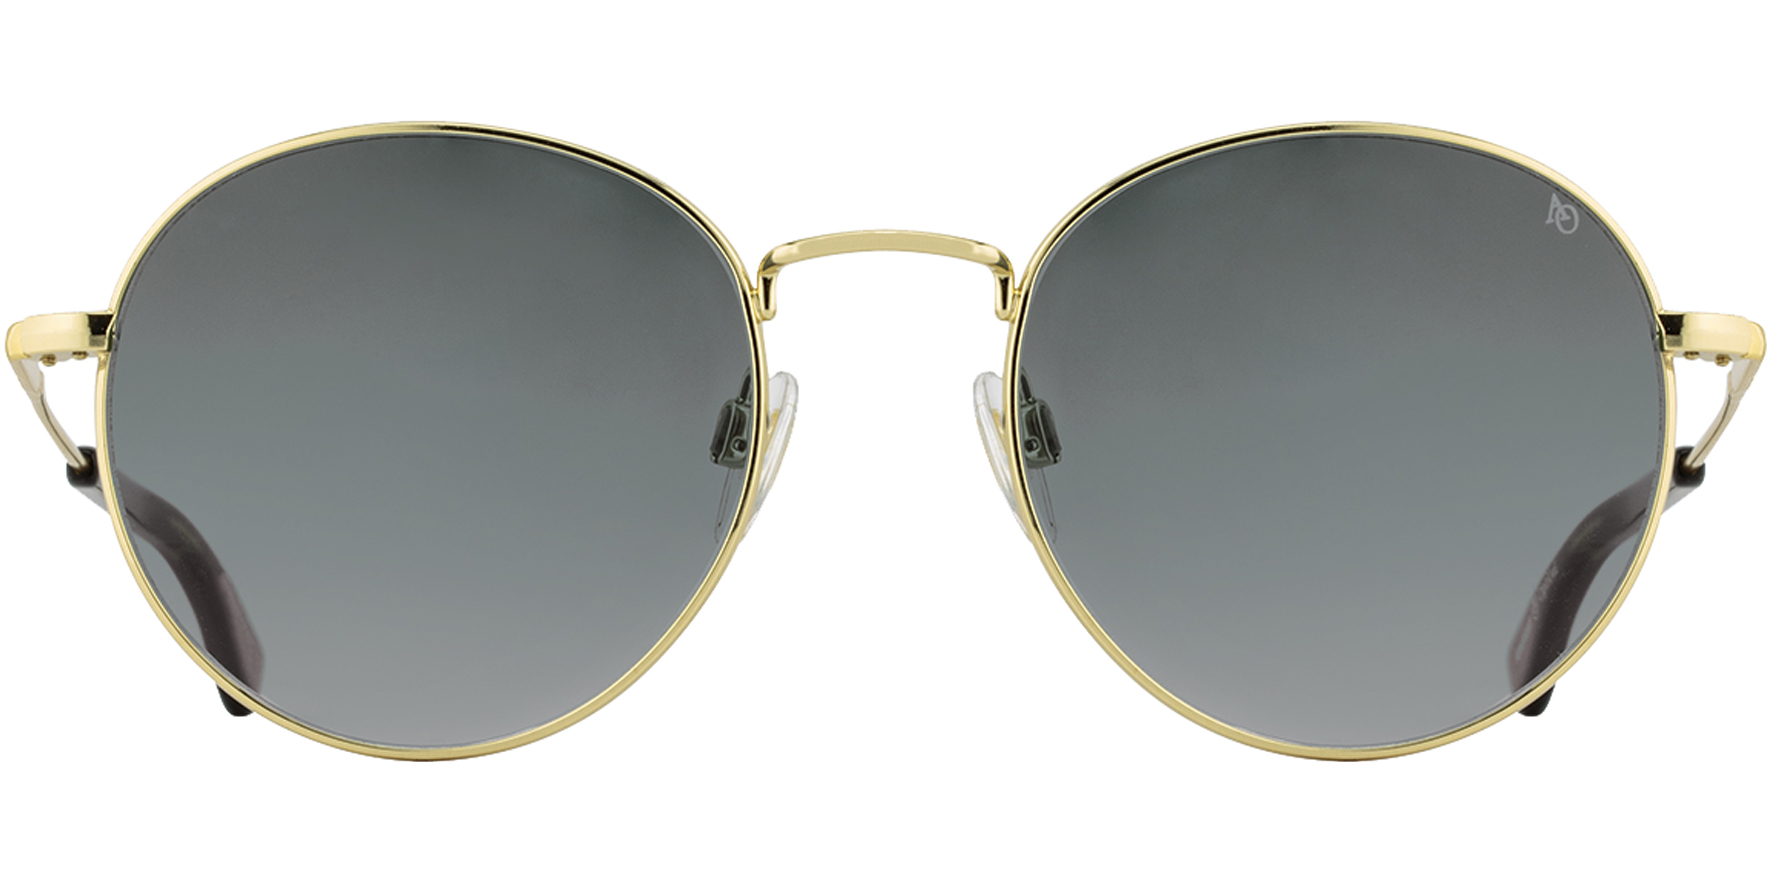 American Optical Gold-Tone Vintage Style Round